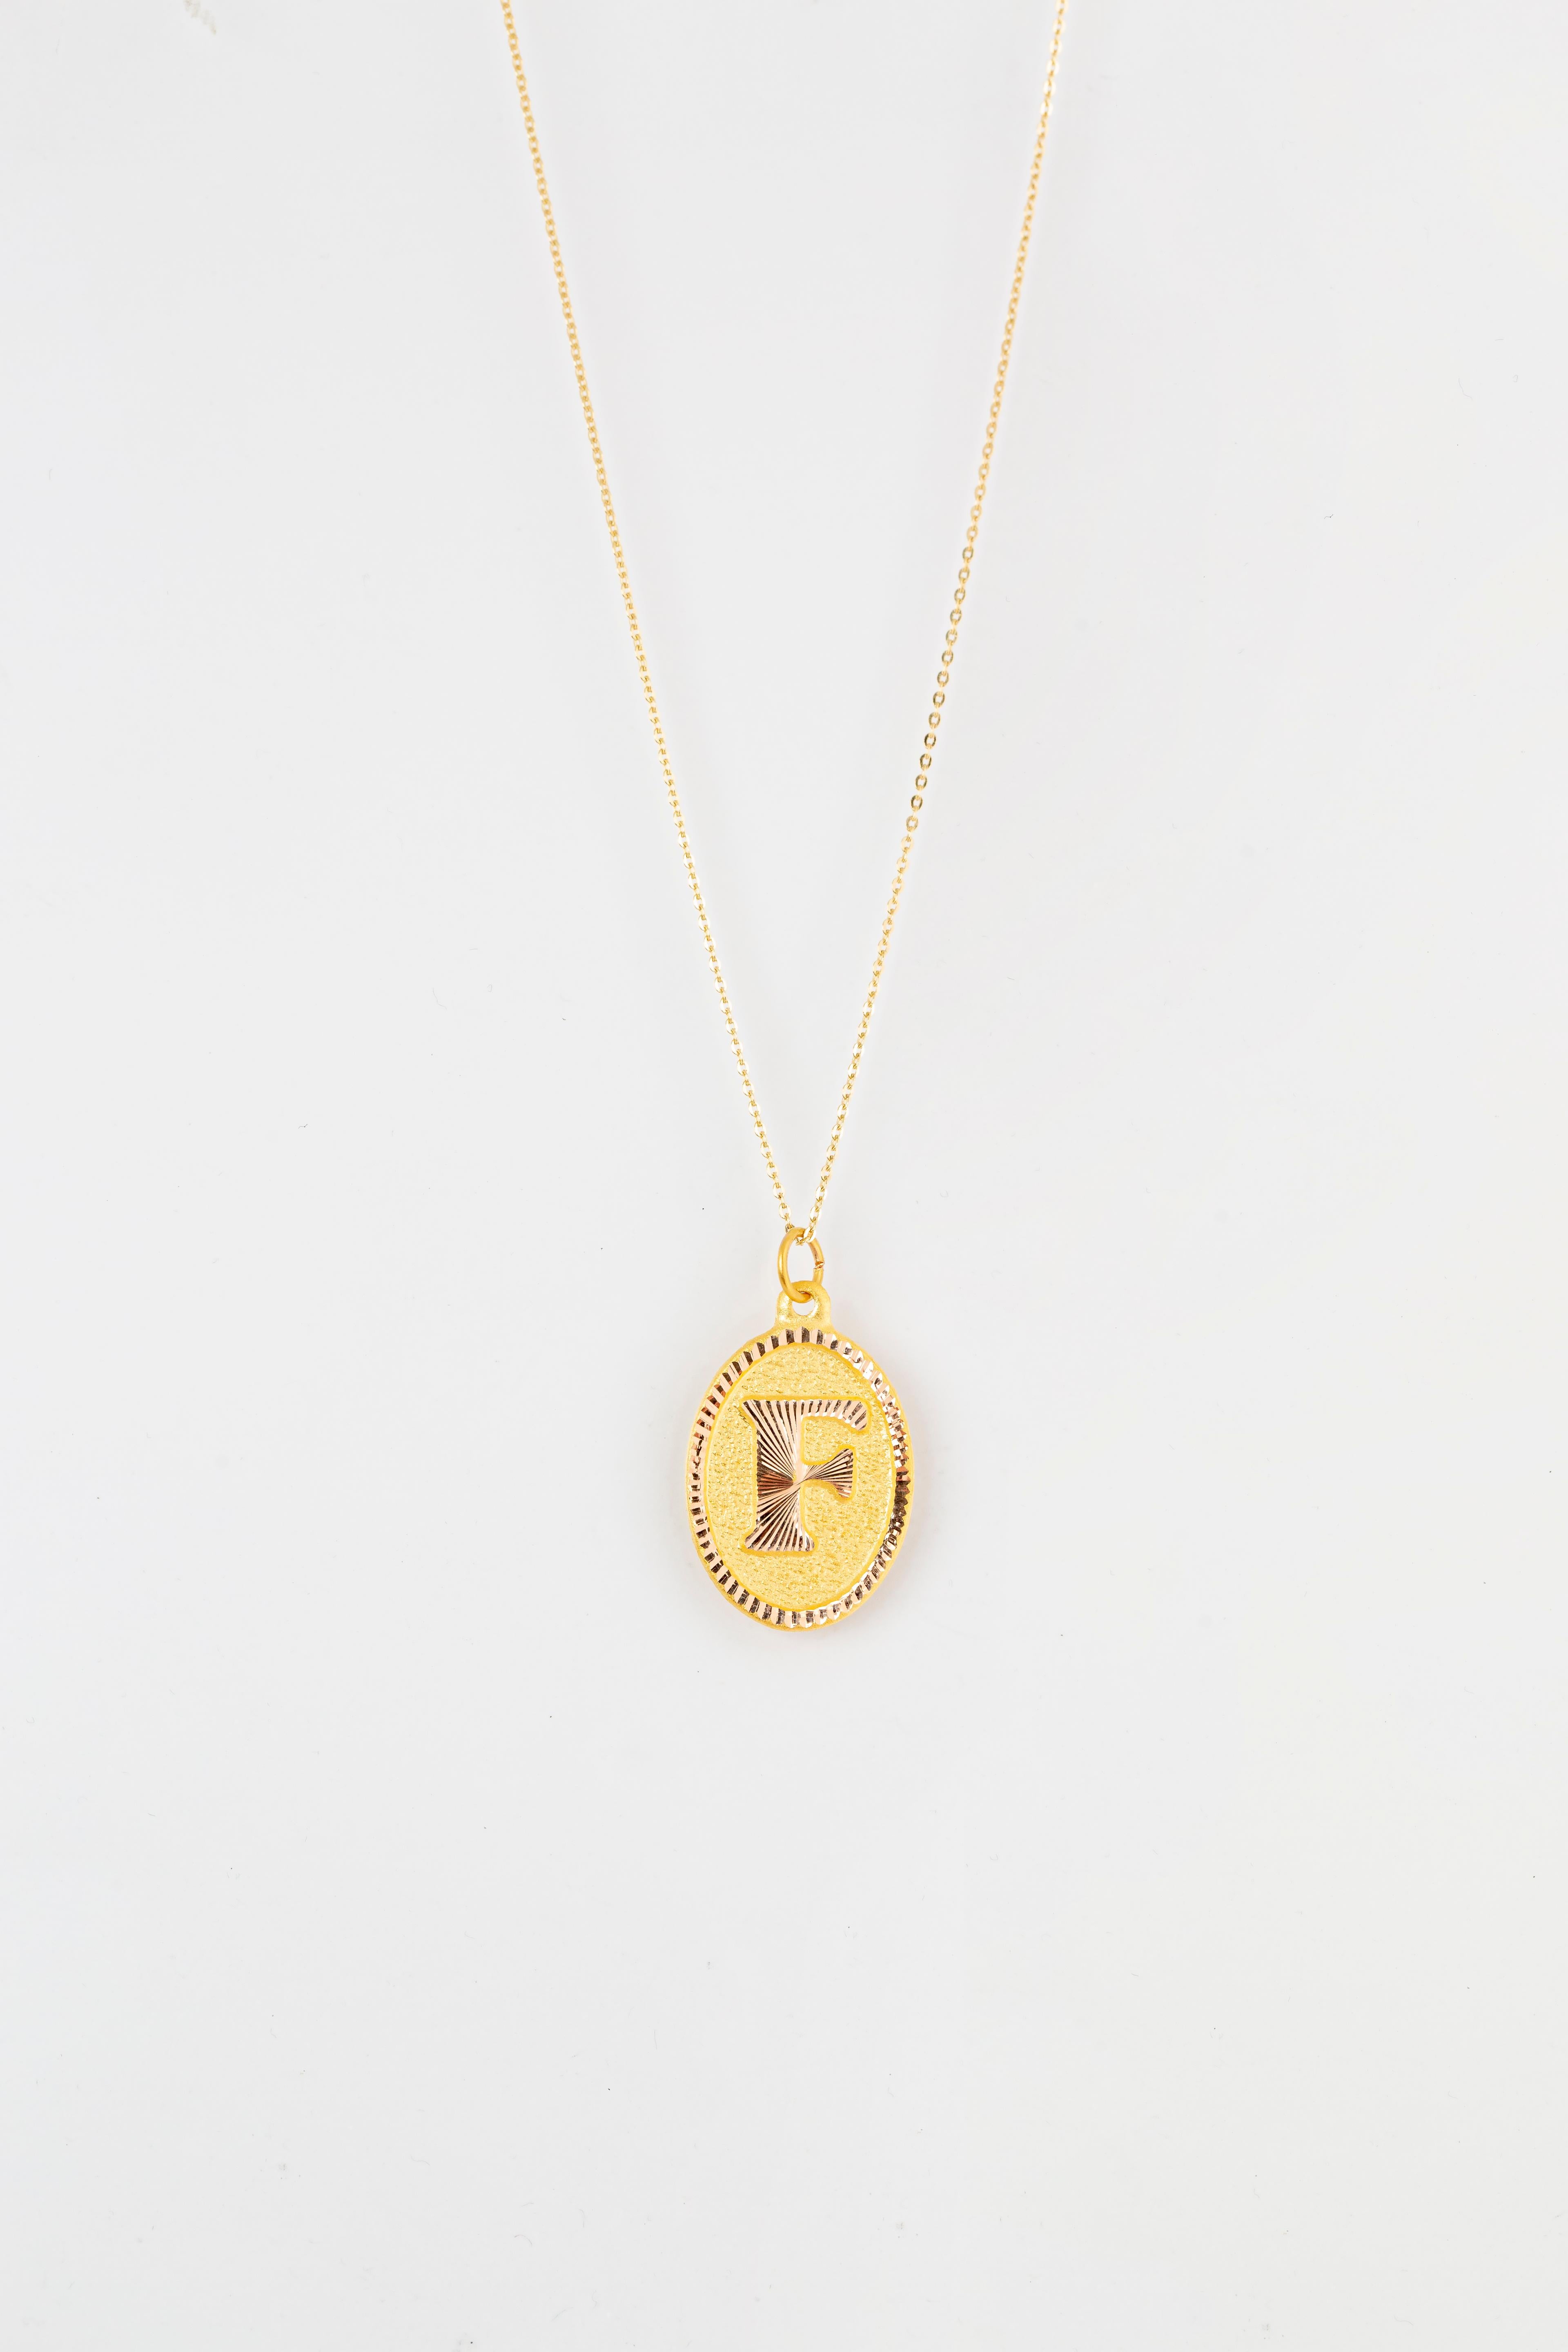 14K Gold Necklaces, Letter Necklace Models, Letter F Gold Necklace-Gift Necklace Models, Daily Necklaces, Letter Jewelry

It's a manual labor product. 'Handmade'. Fashionable product.

This necklace was made with quality materials and excellent